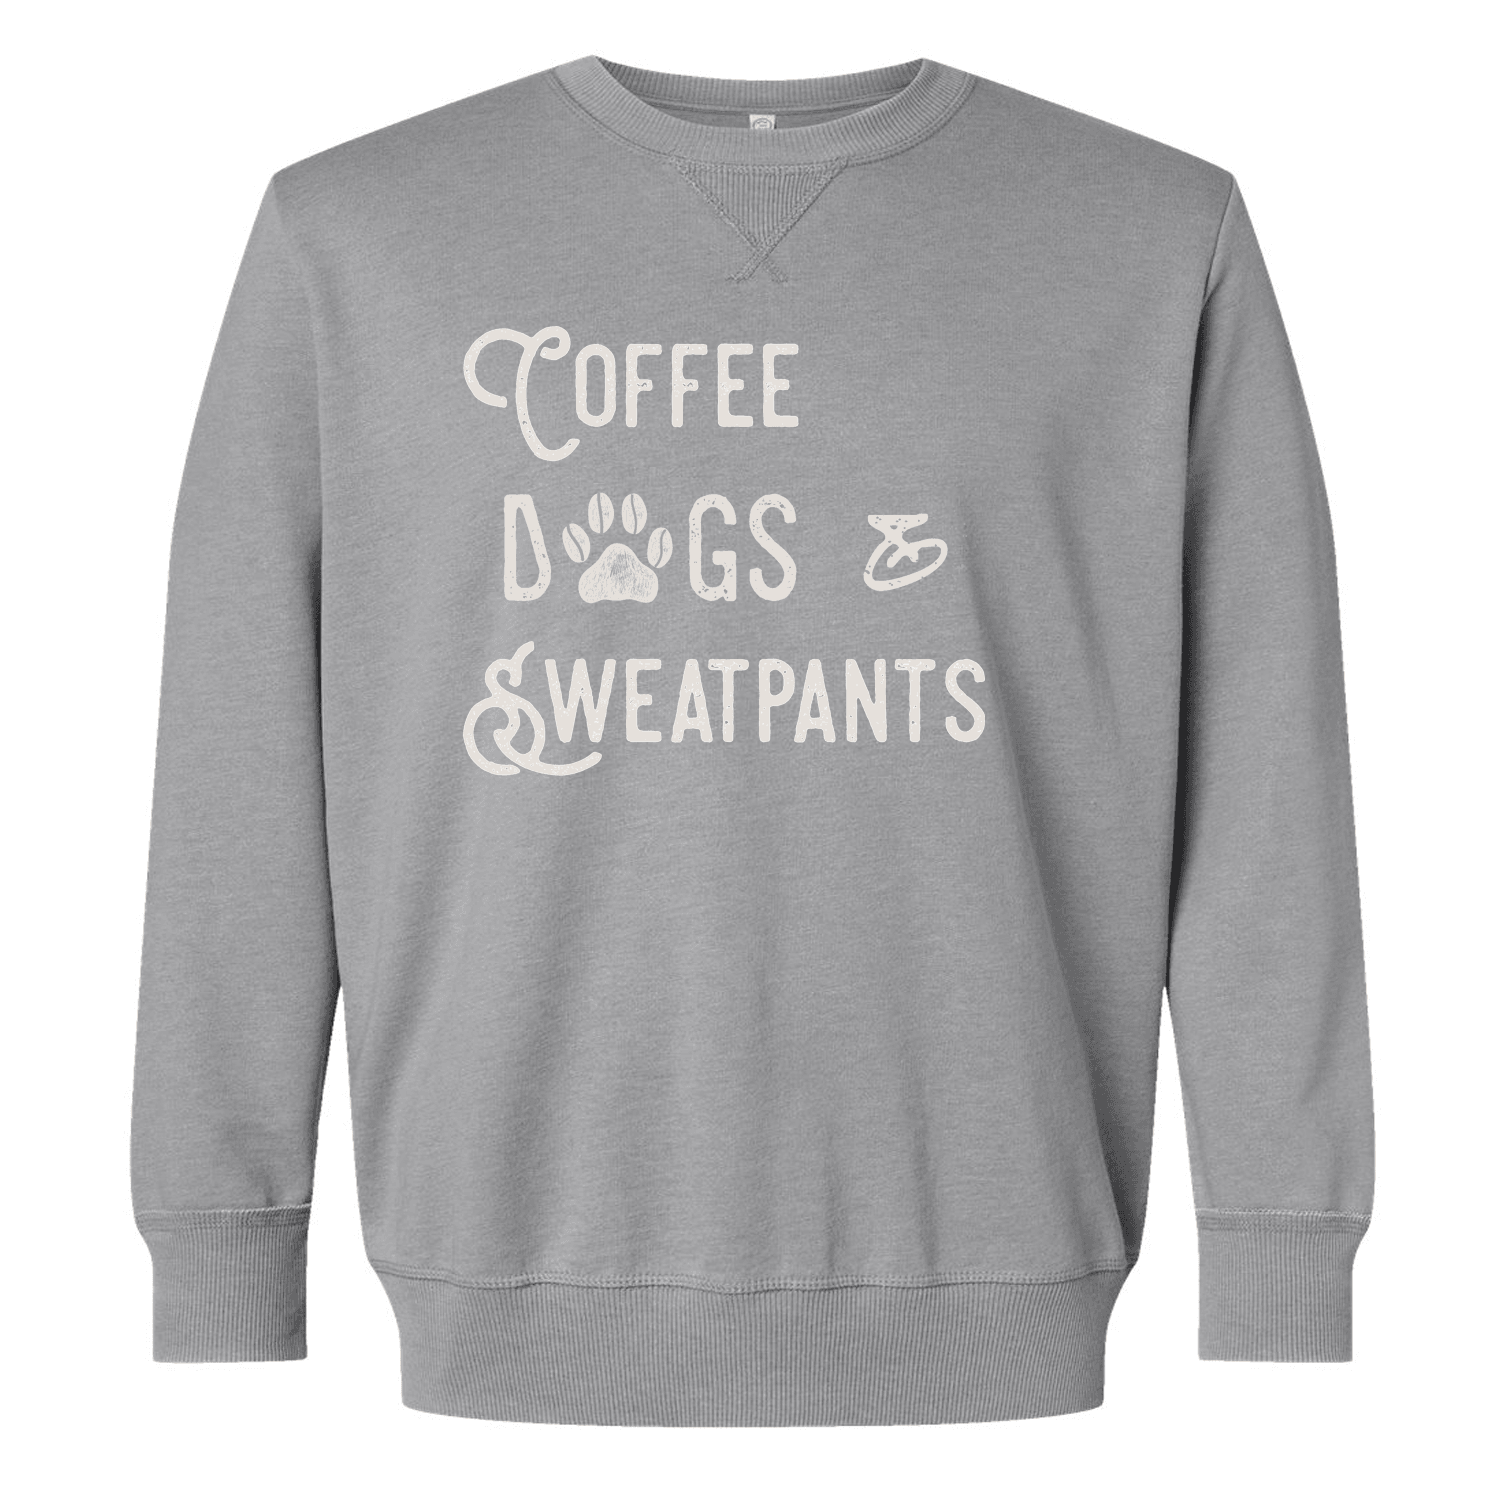 Coffee, Dogs, and Sweatpants Sweatshirt - Ales to Trails